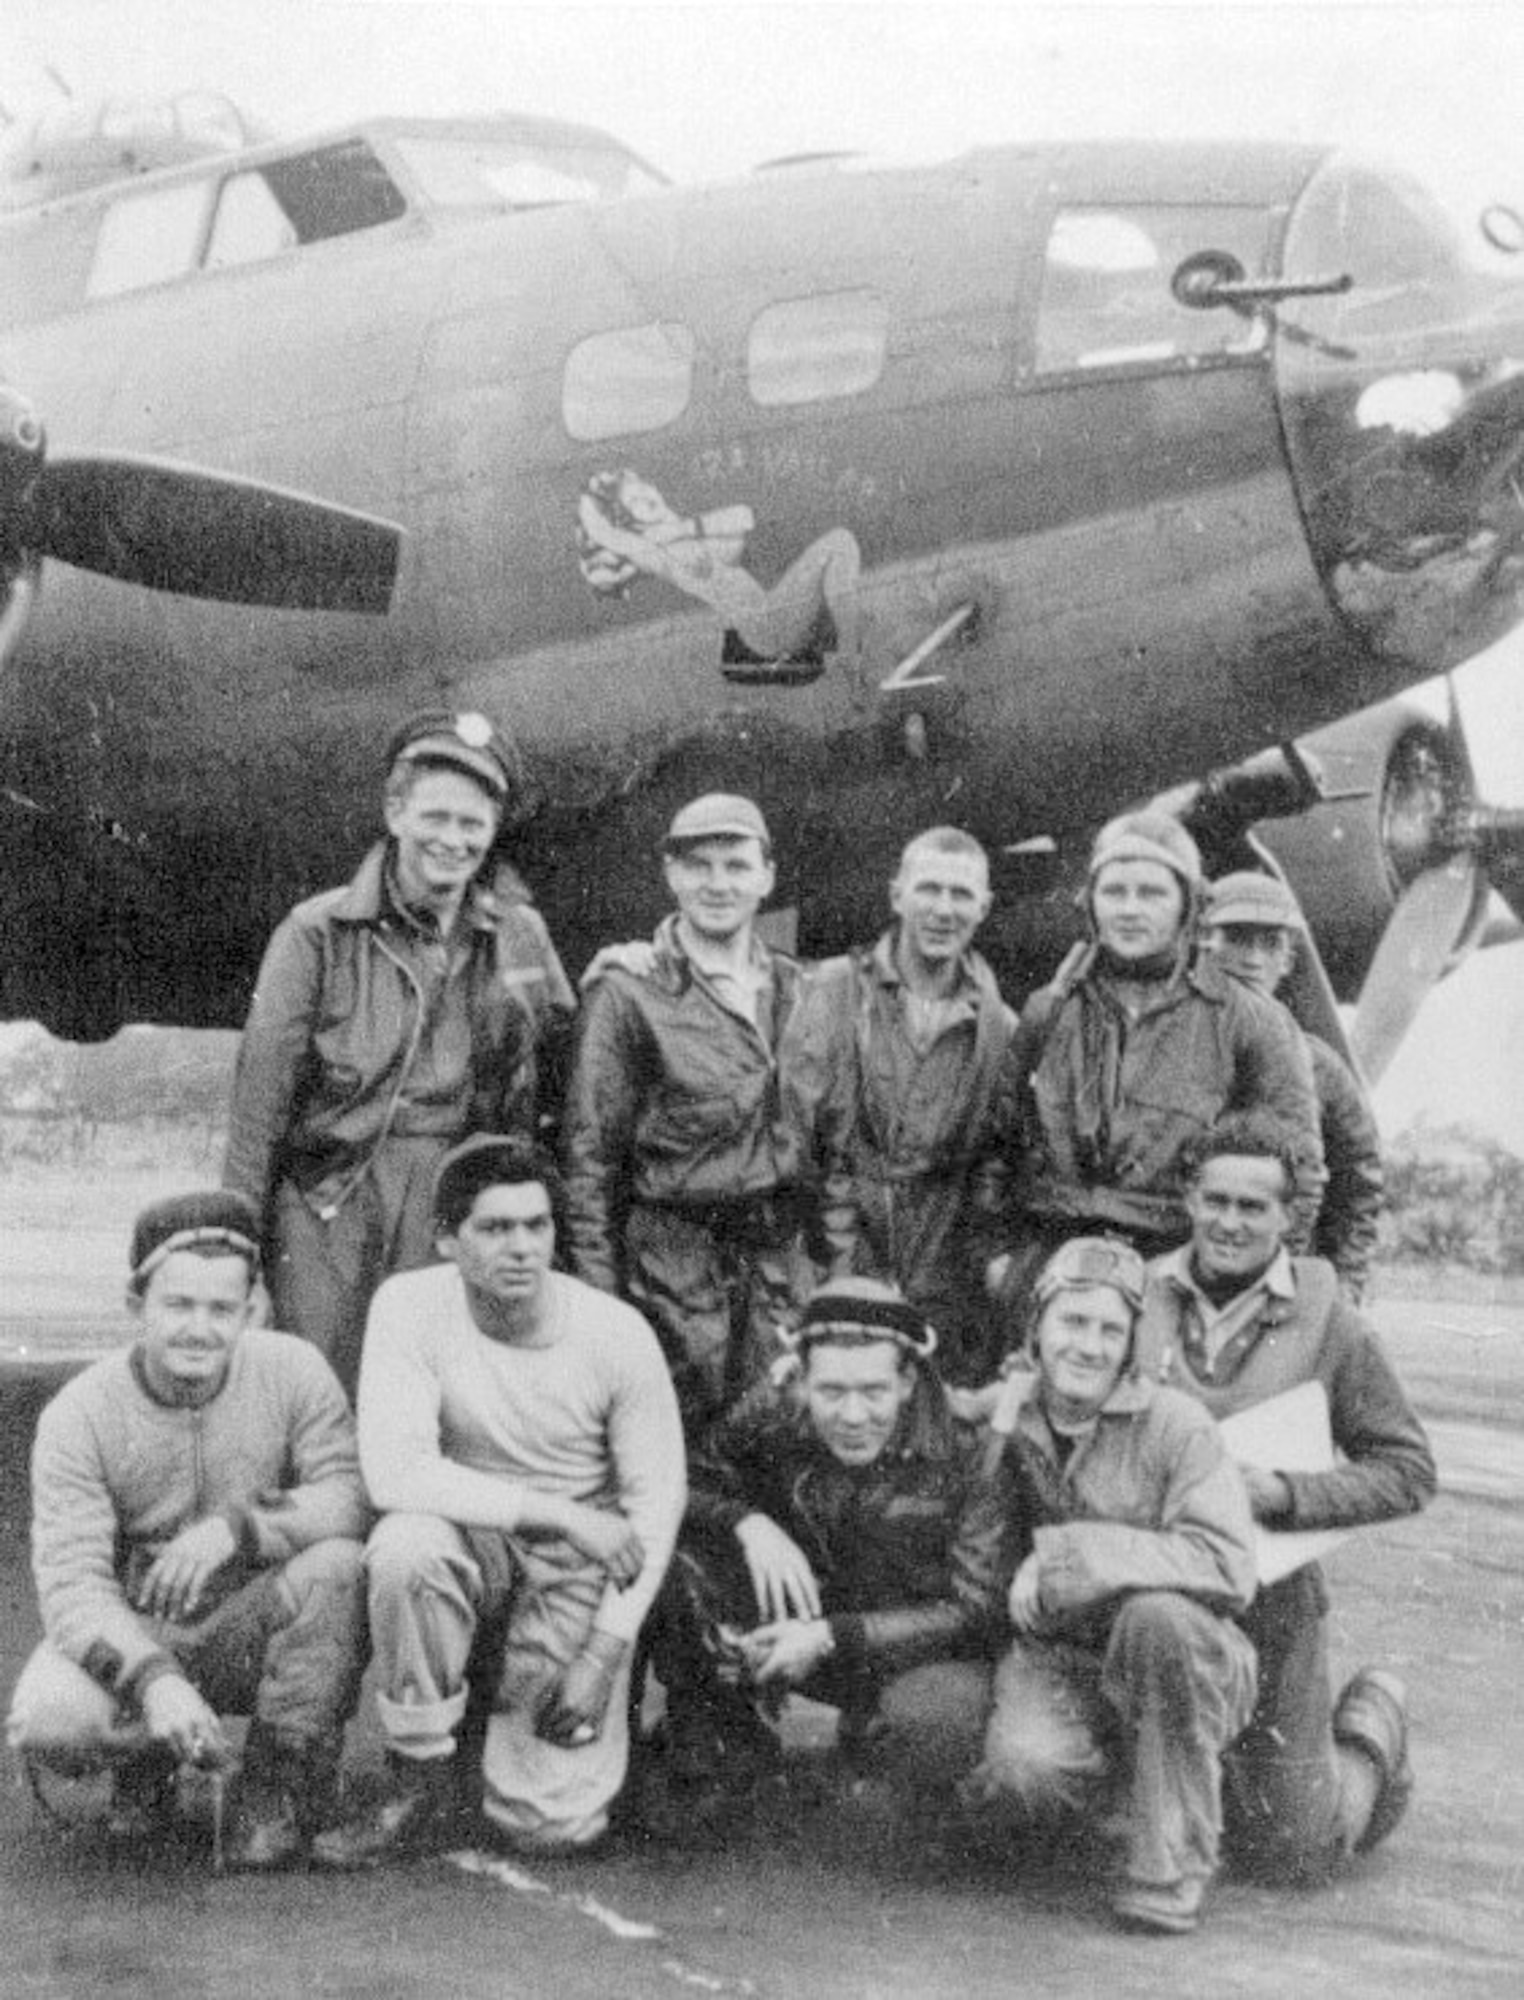 TSgt. Eddie Deerfield (2nd from left front row) returns to RAF Molesworth 13 May for HELL'S ANGELS DAY.  Deerfield flew as radioman on B-17 Flying Fortress IZA VAILABLE in 1943 (Photo courtesy of 303rd Bomb Group)